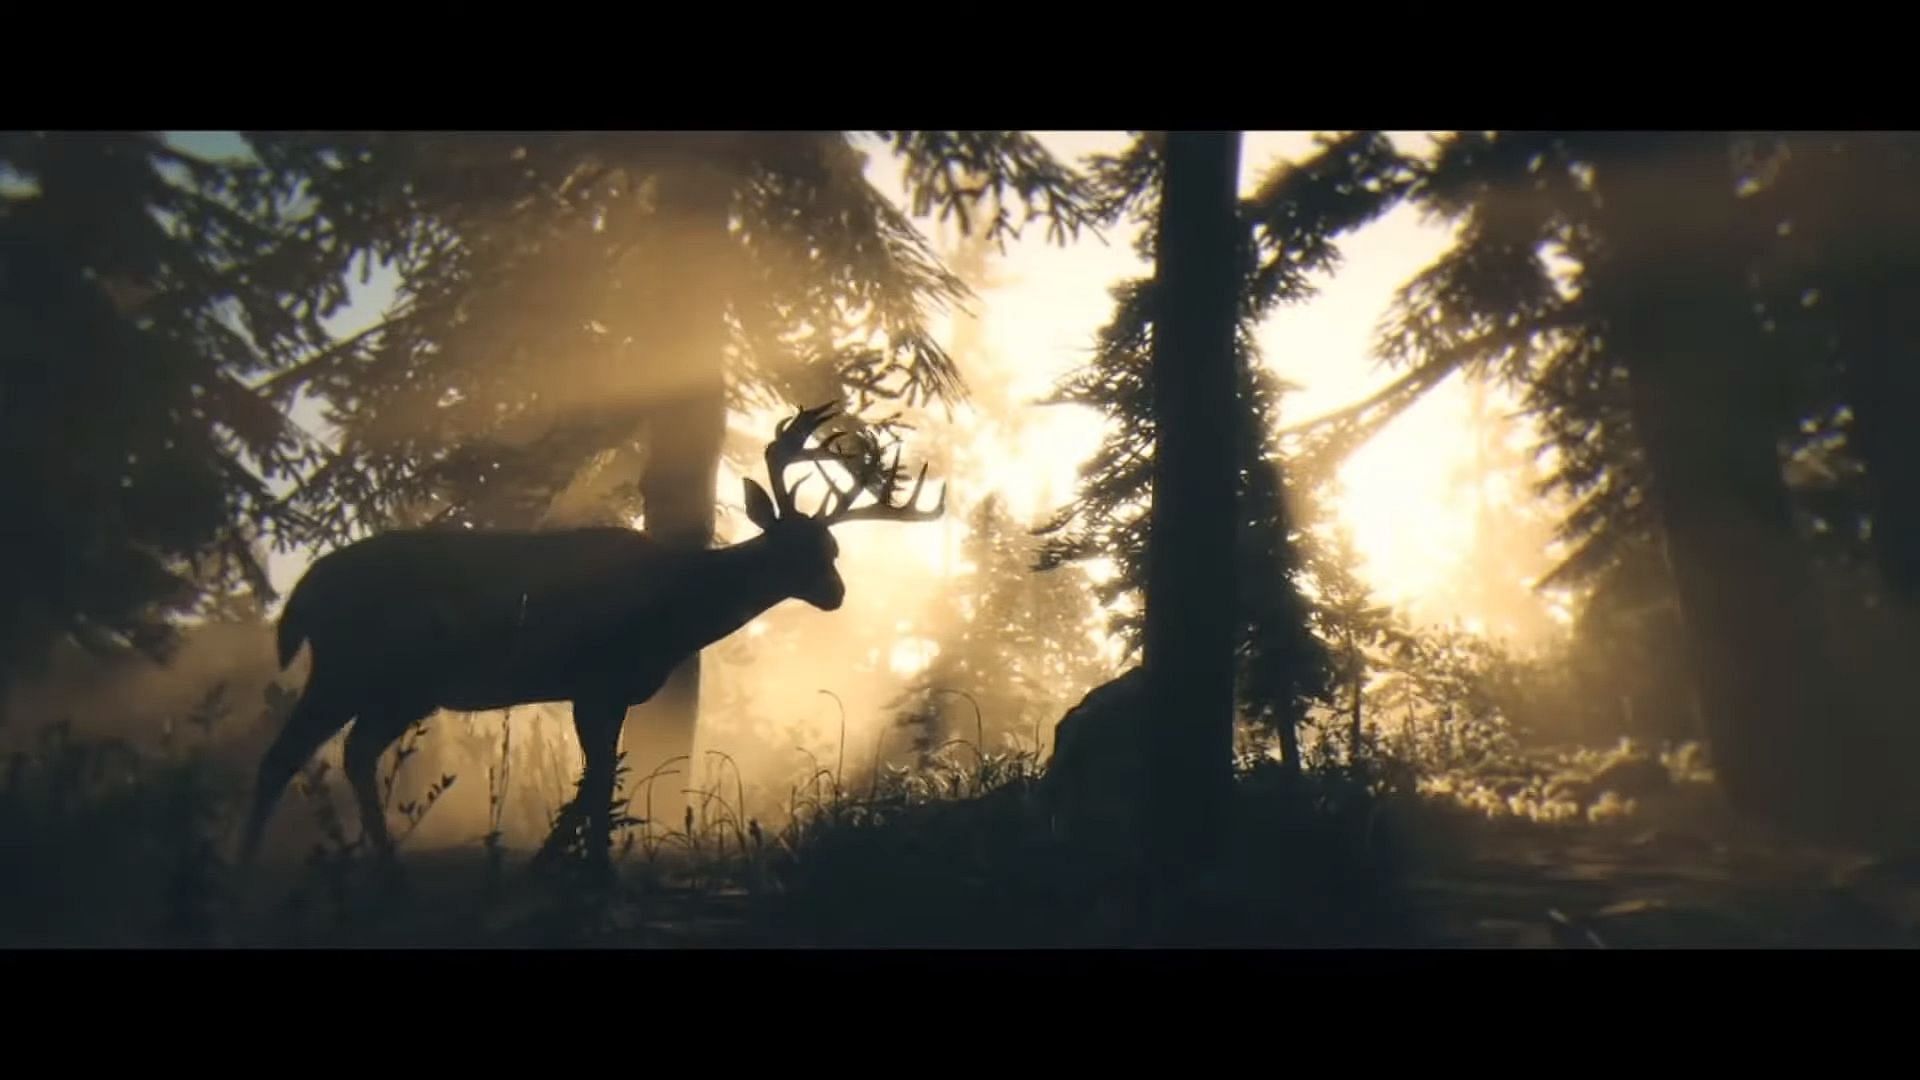 High honor playthrough gives Arthur visions of a Stag (Image via Rockstar Studios || YouTube/Dayker)